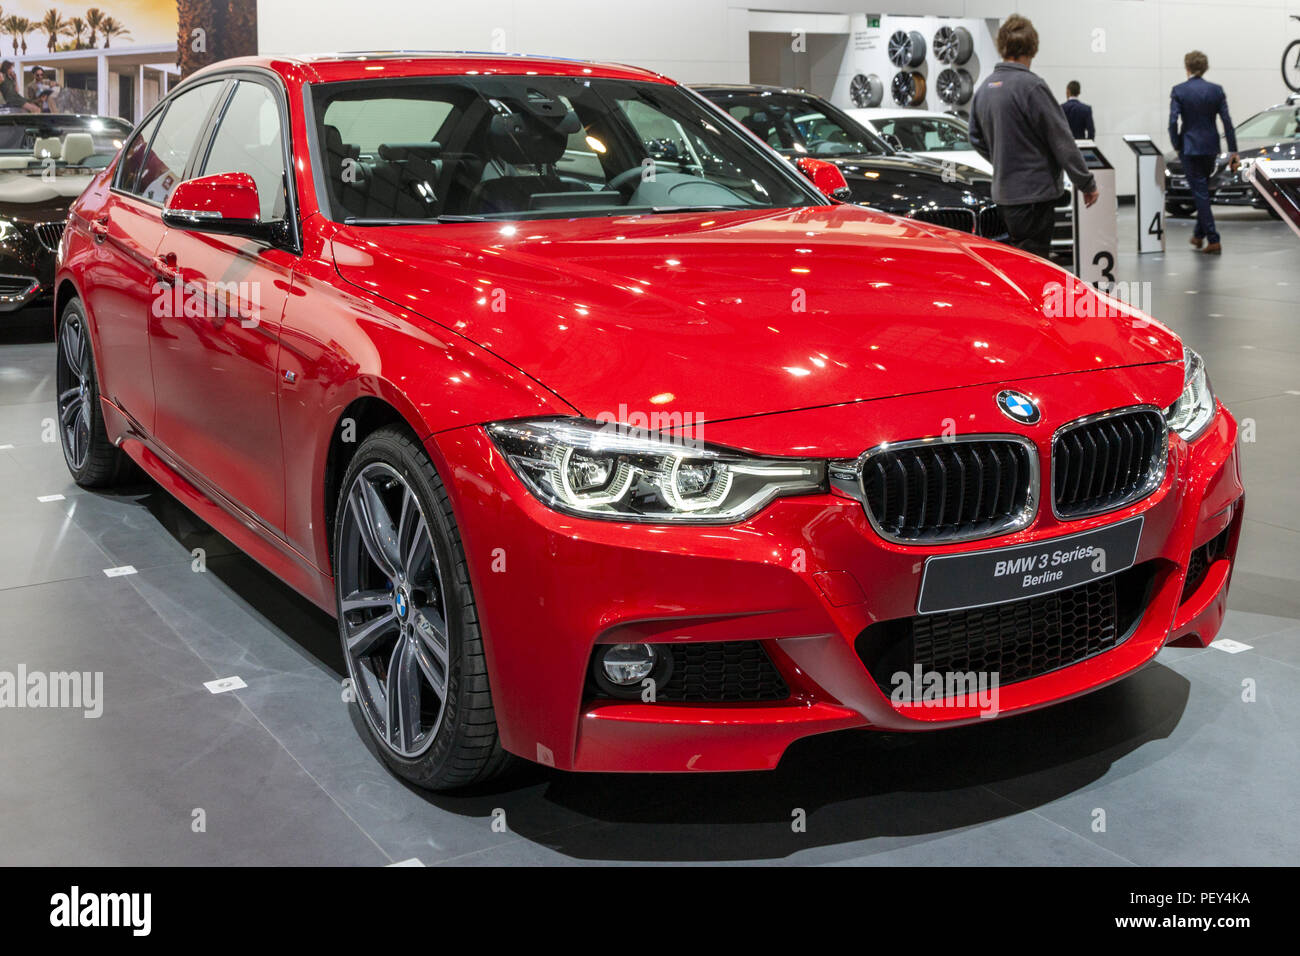 BRUSSELS - JAN 12, 2016: BMW 3 Series Berline car showcased at the Brussels Motor Show. Stock Photo